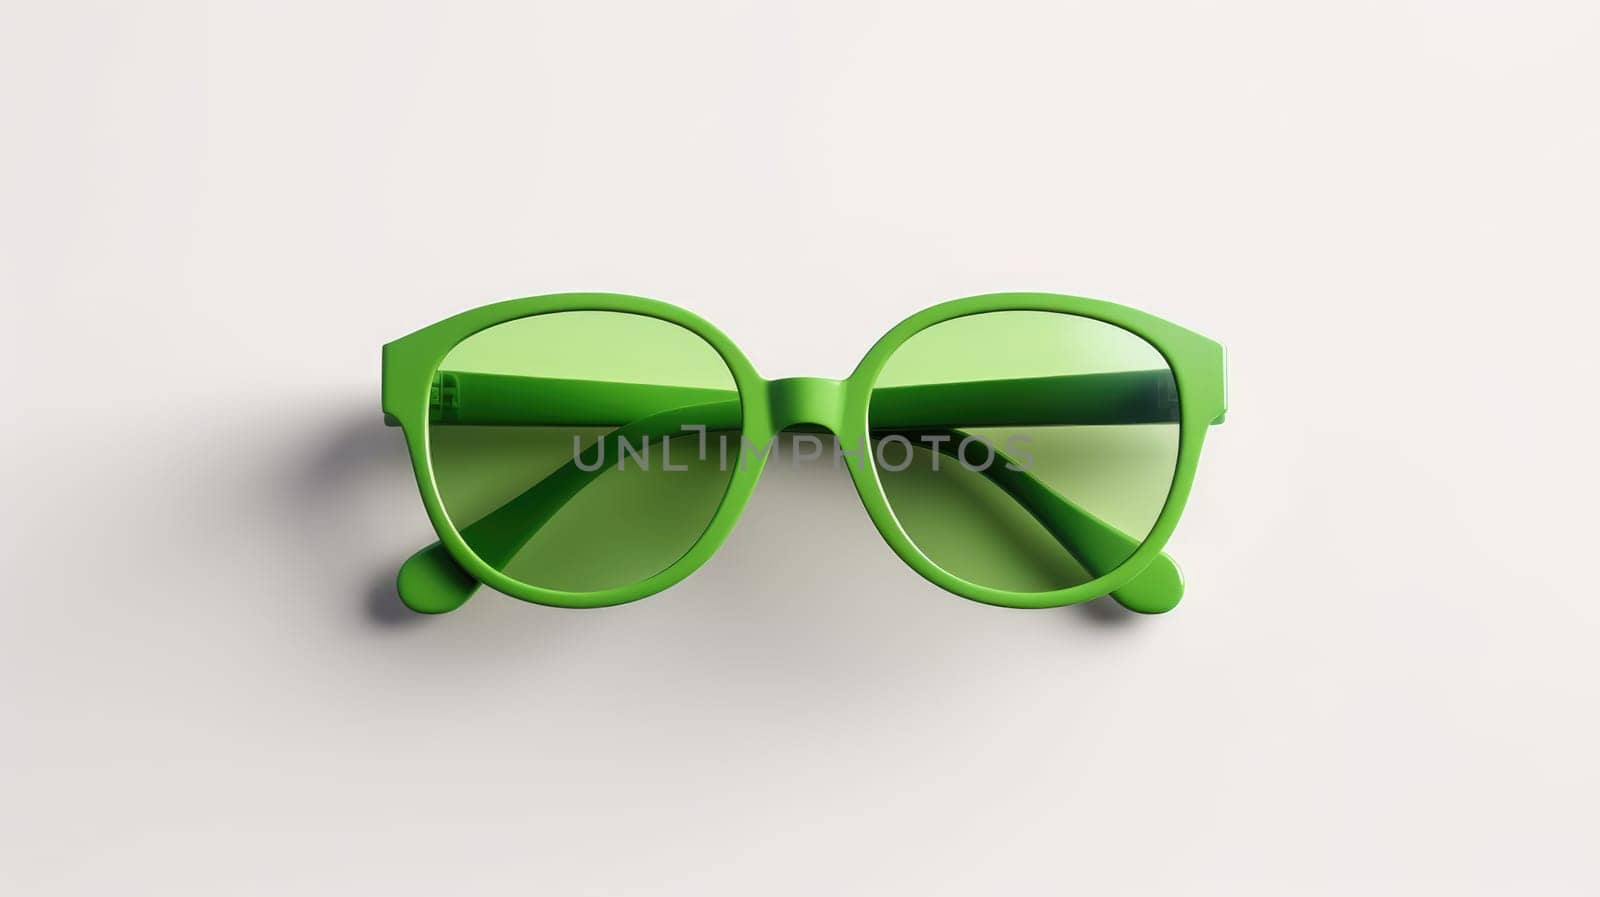 These stylish brown retro sunglasses with circular frames rest elegantly on a bed of vibrant green four-leaf clovers, basking in the warm glow of the sunlight in a picturesque scene.